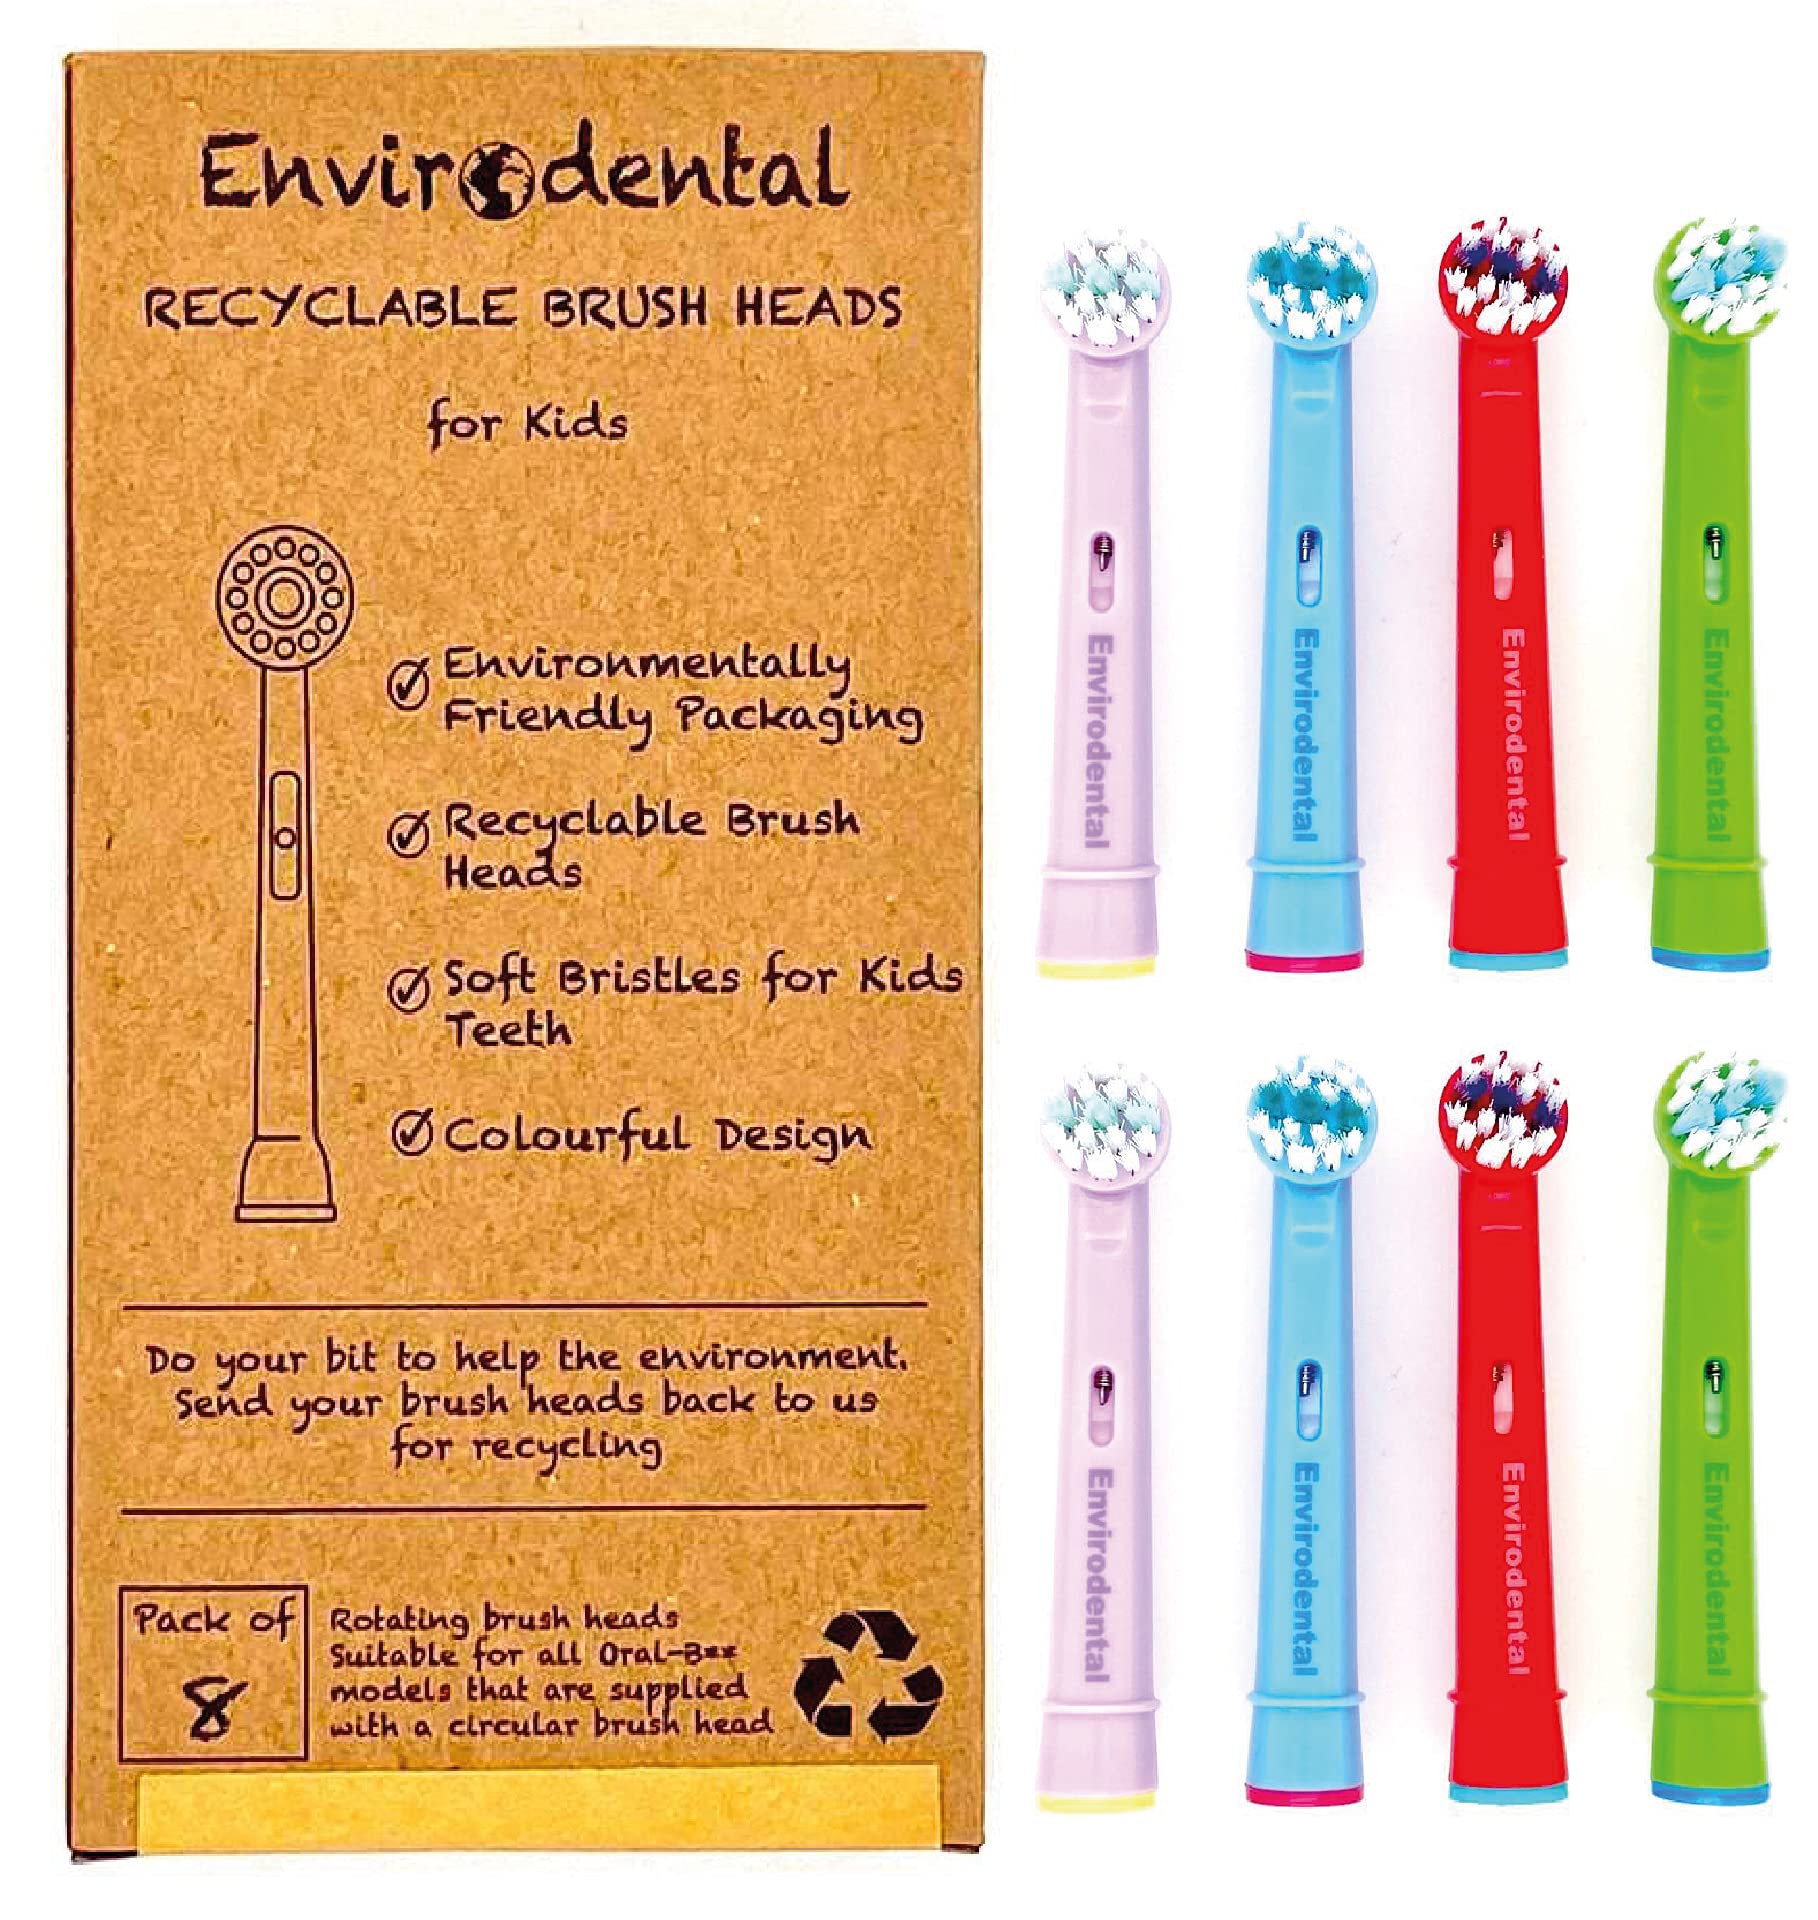 Eco Friendly Oral B Compatible Replacement Kids Toothbrush Heads by Envirodental - Fully Recyclable Colourful Pack of 8 Brushes - with Soft Bristles for Kids - for Electric Toothbrushes